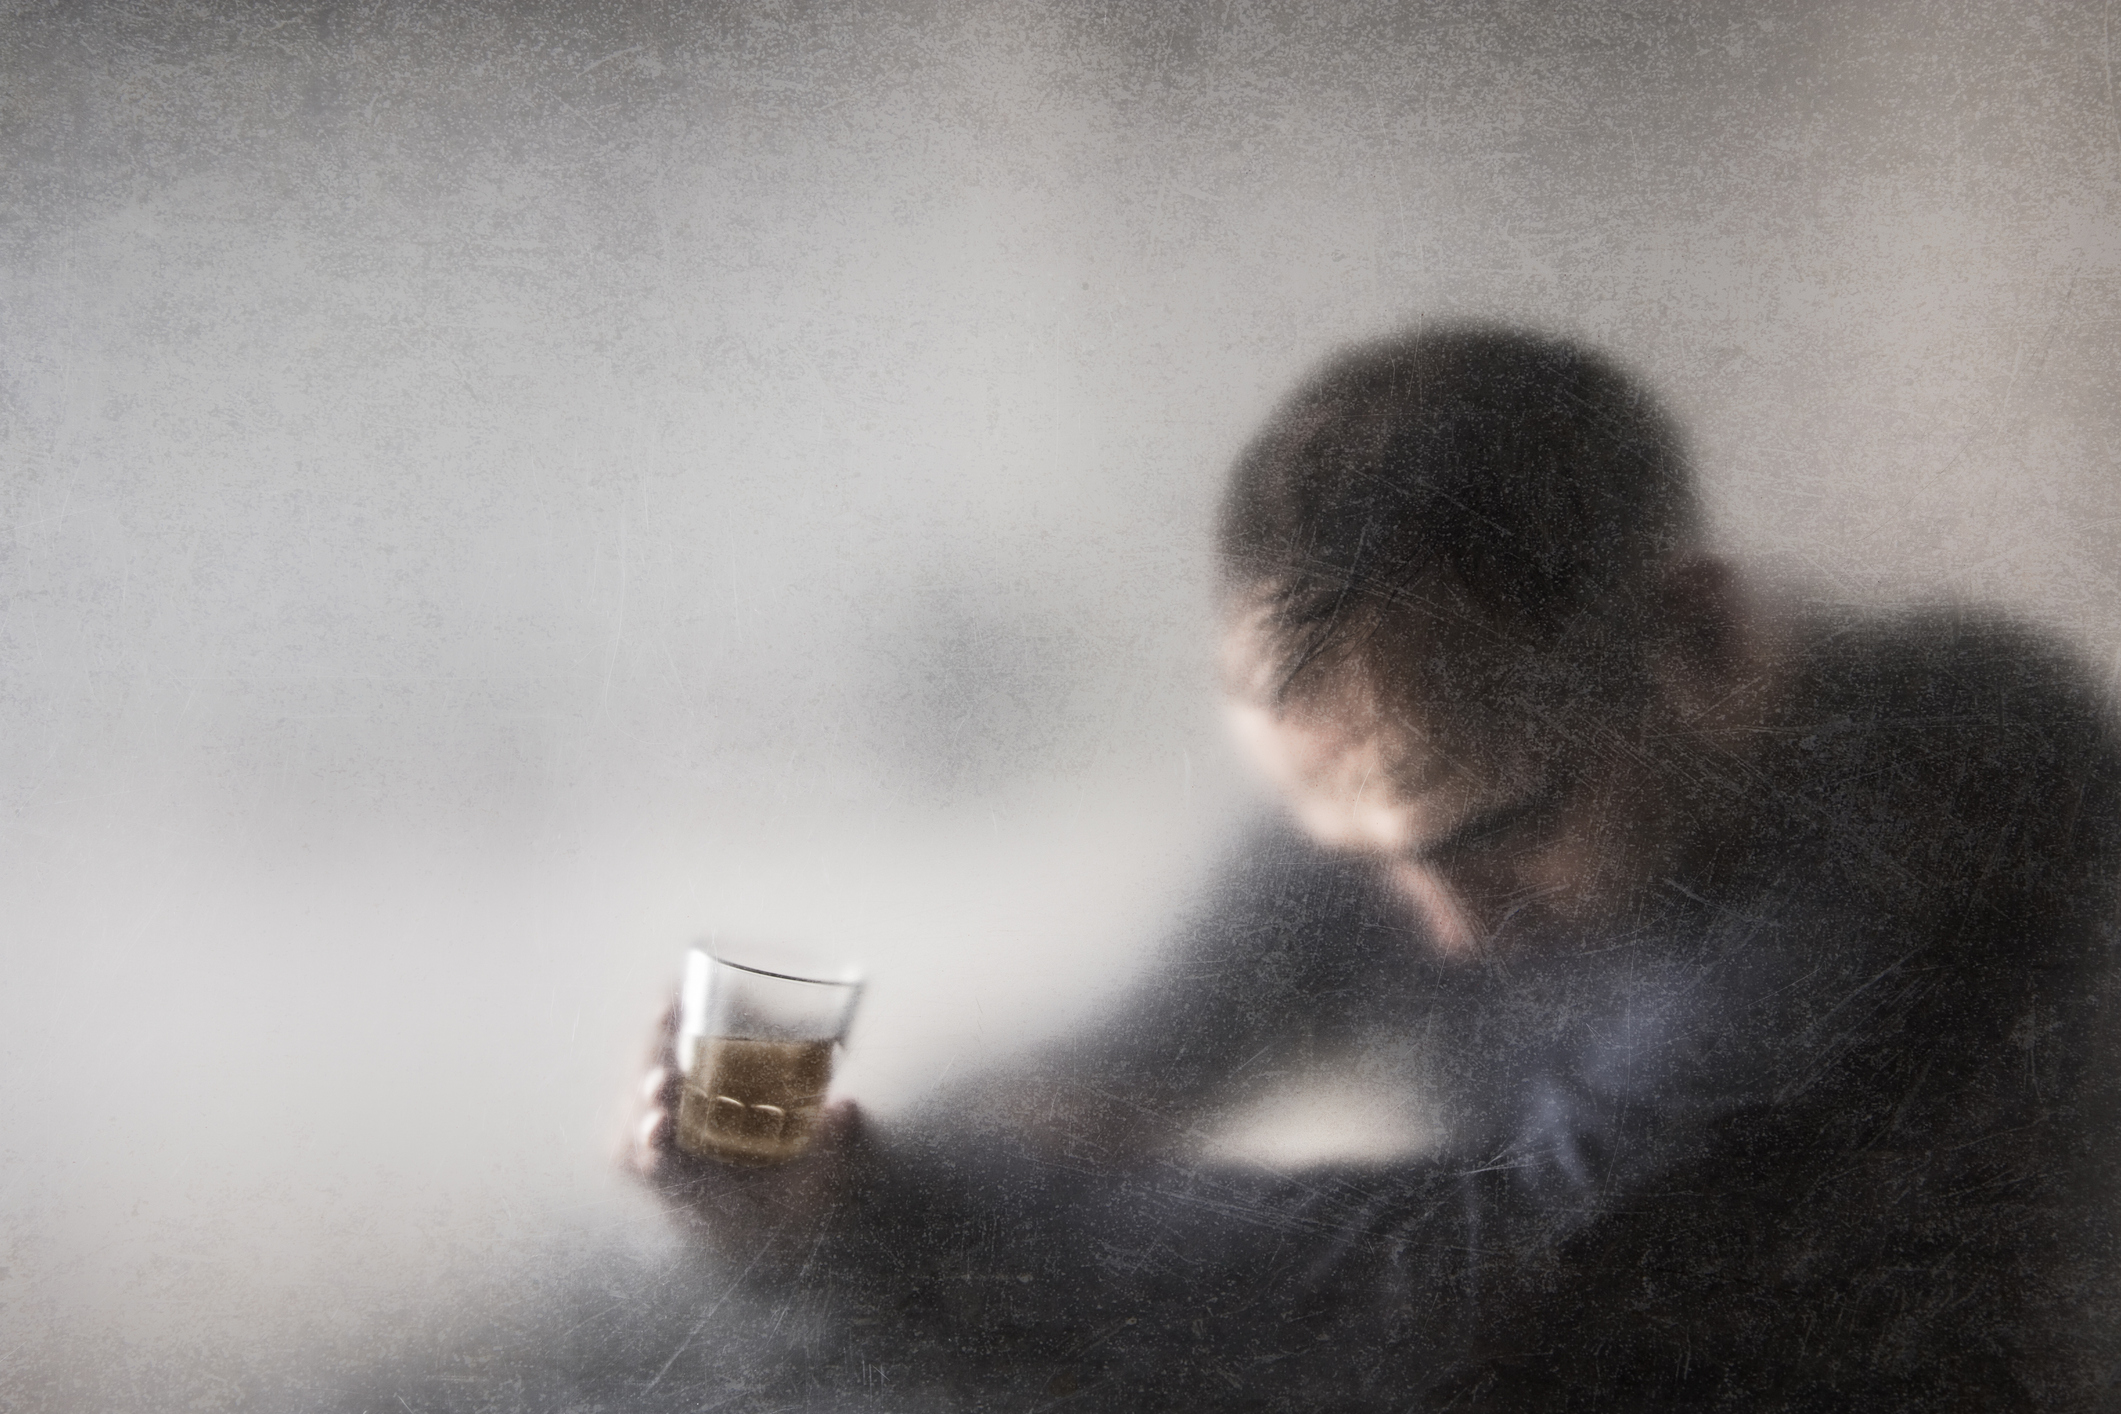 Excess Alcohol Use Post-COVID: The Next Public Health Crisis?